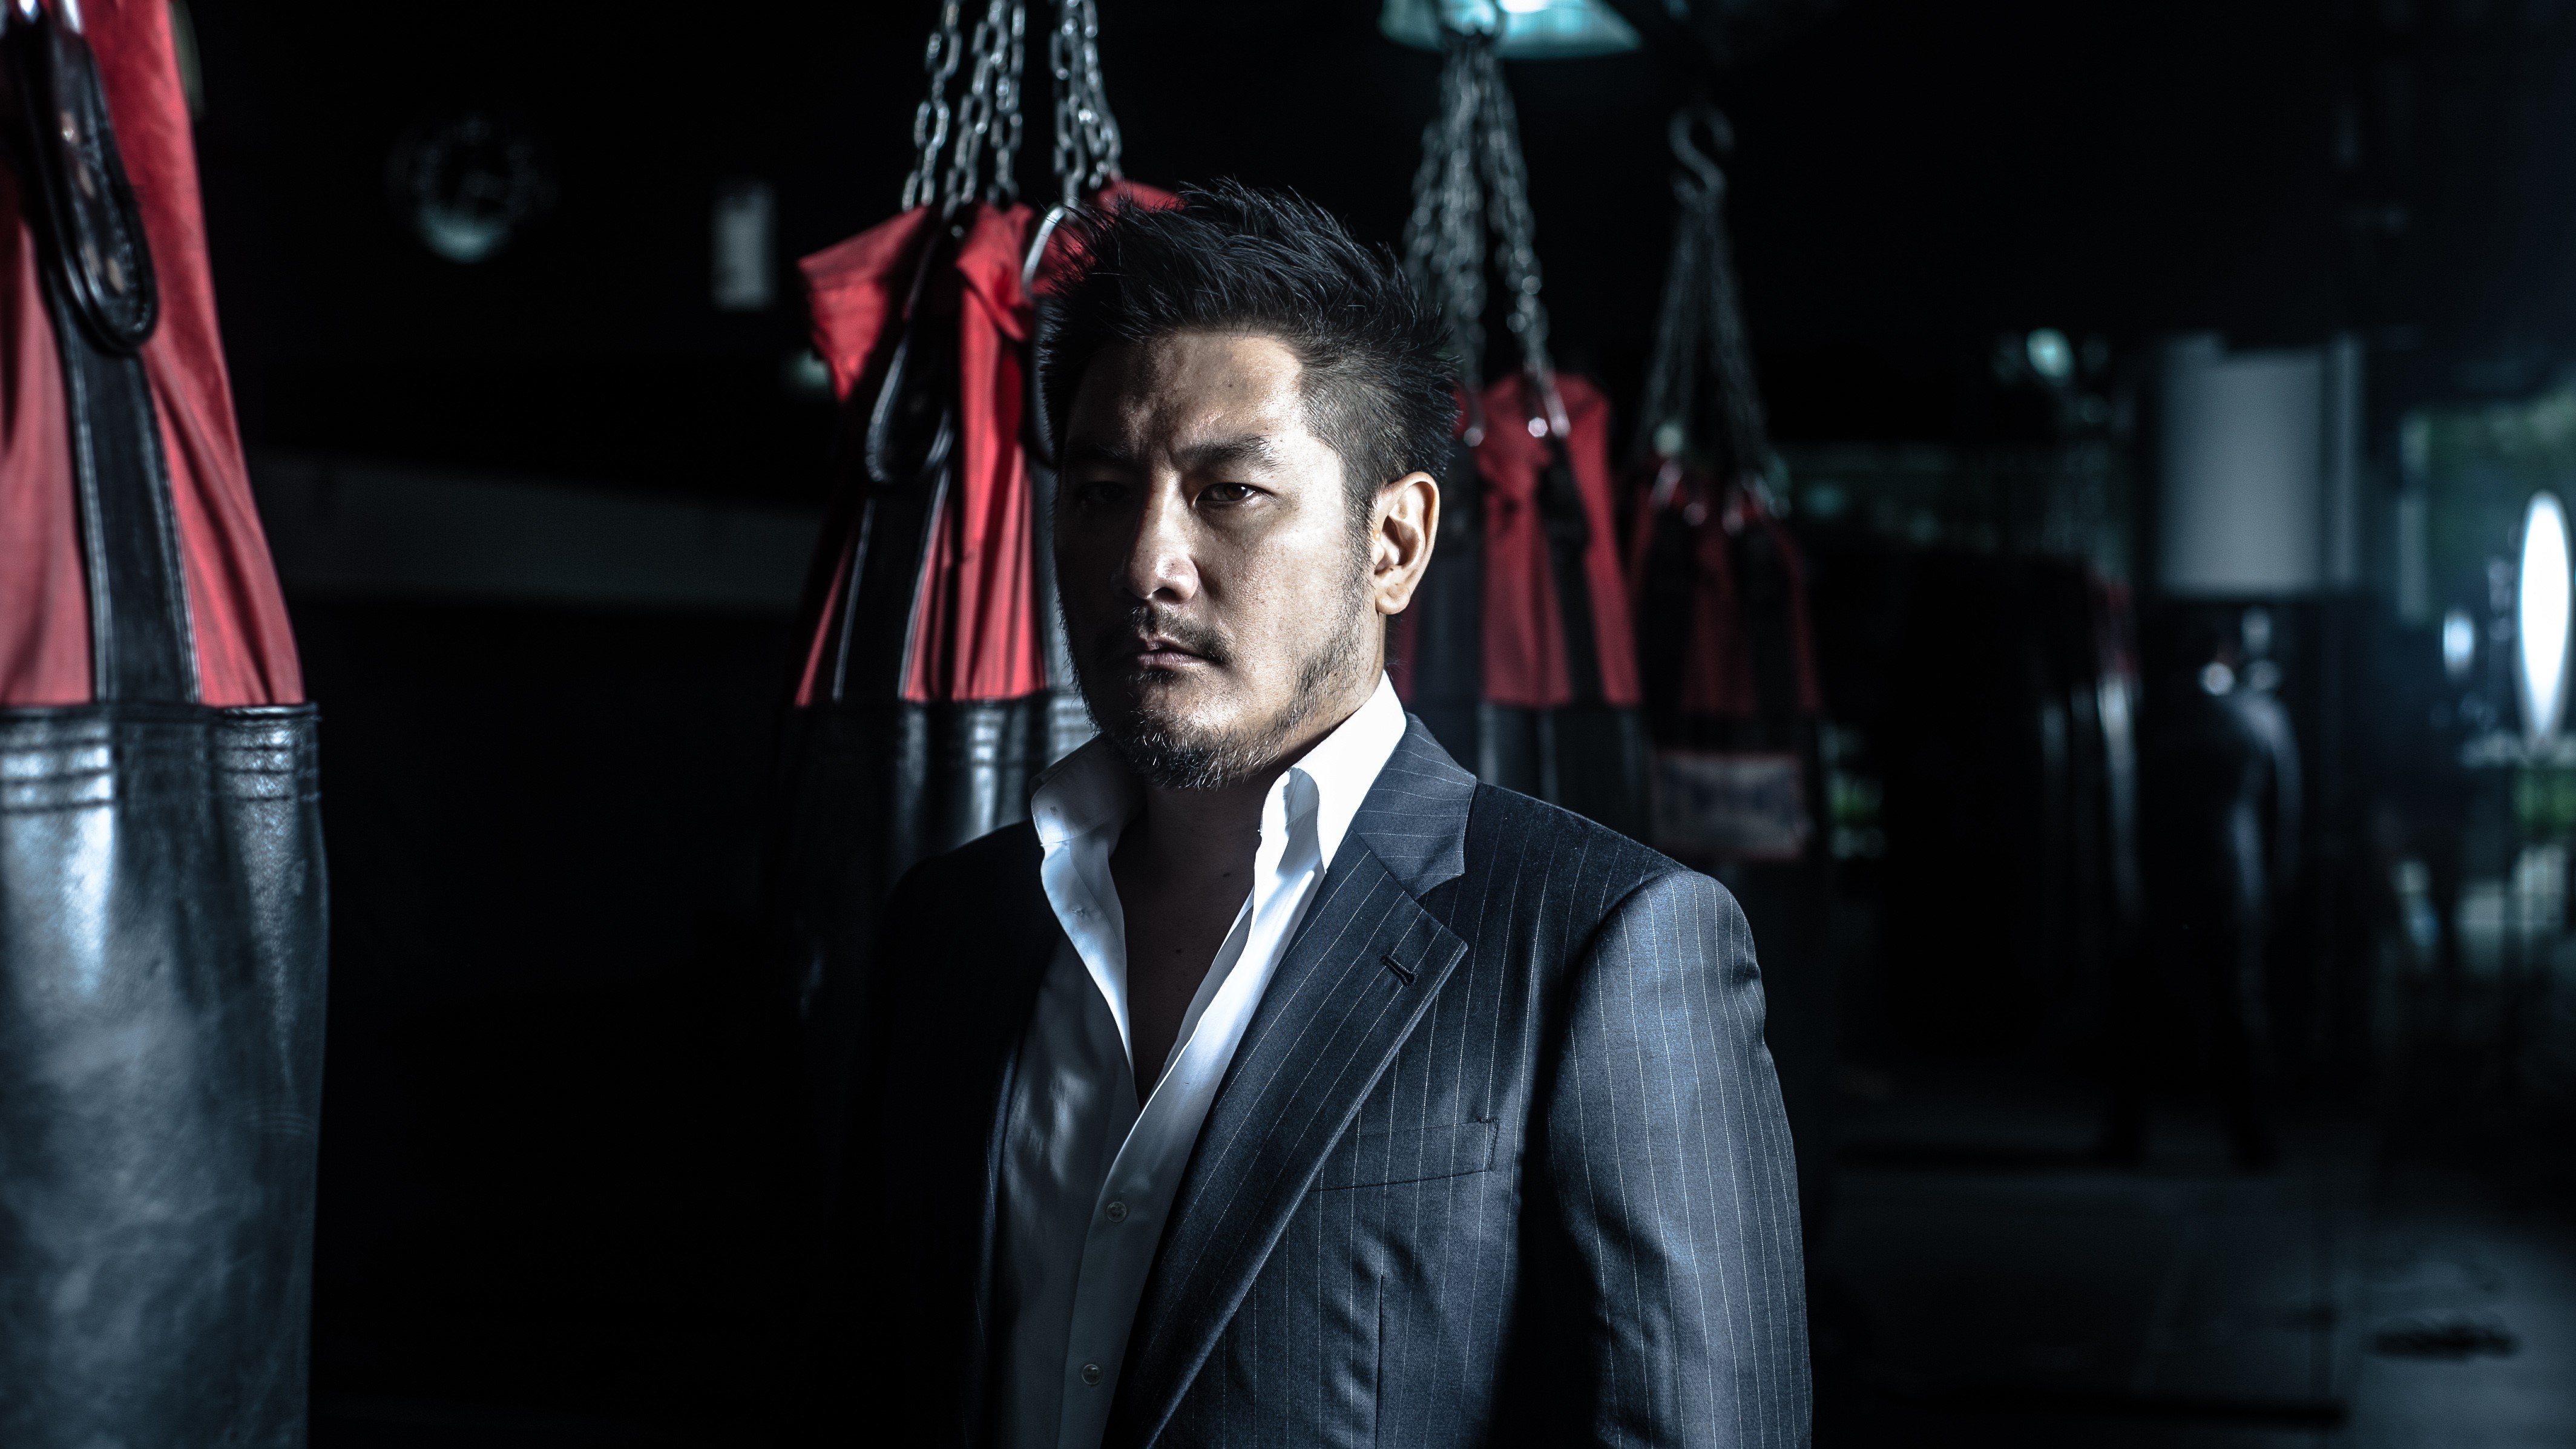 One Championship founder and CEO, Chatri Sityodtong